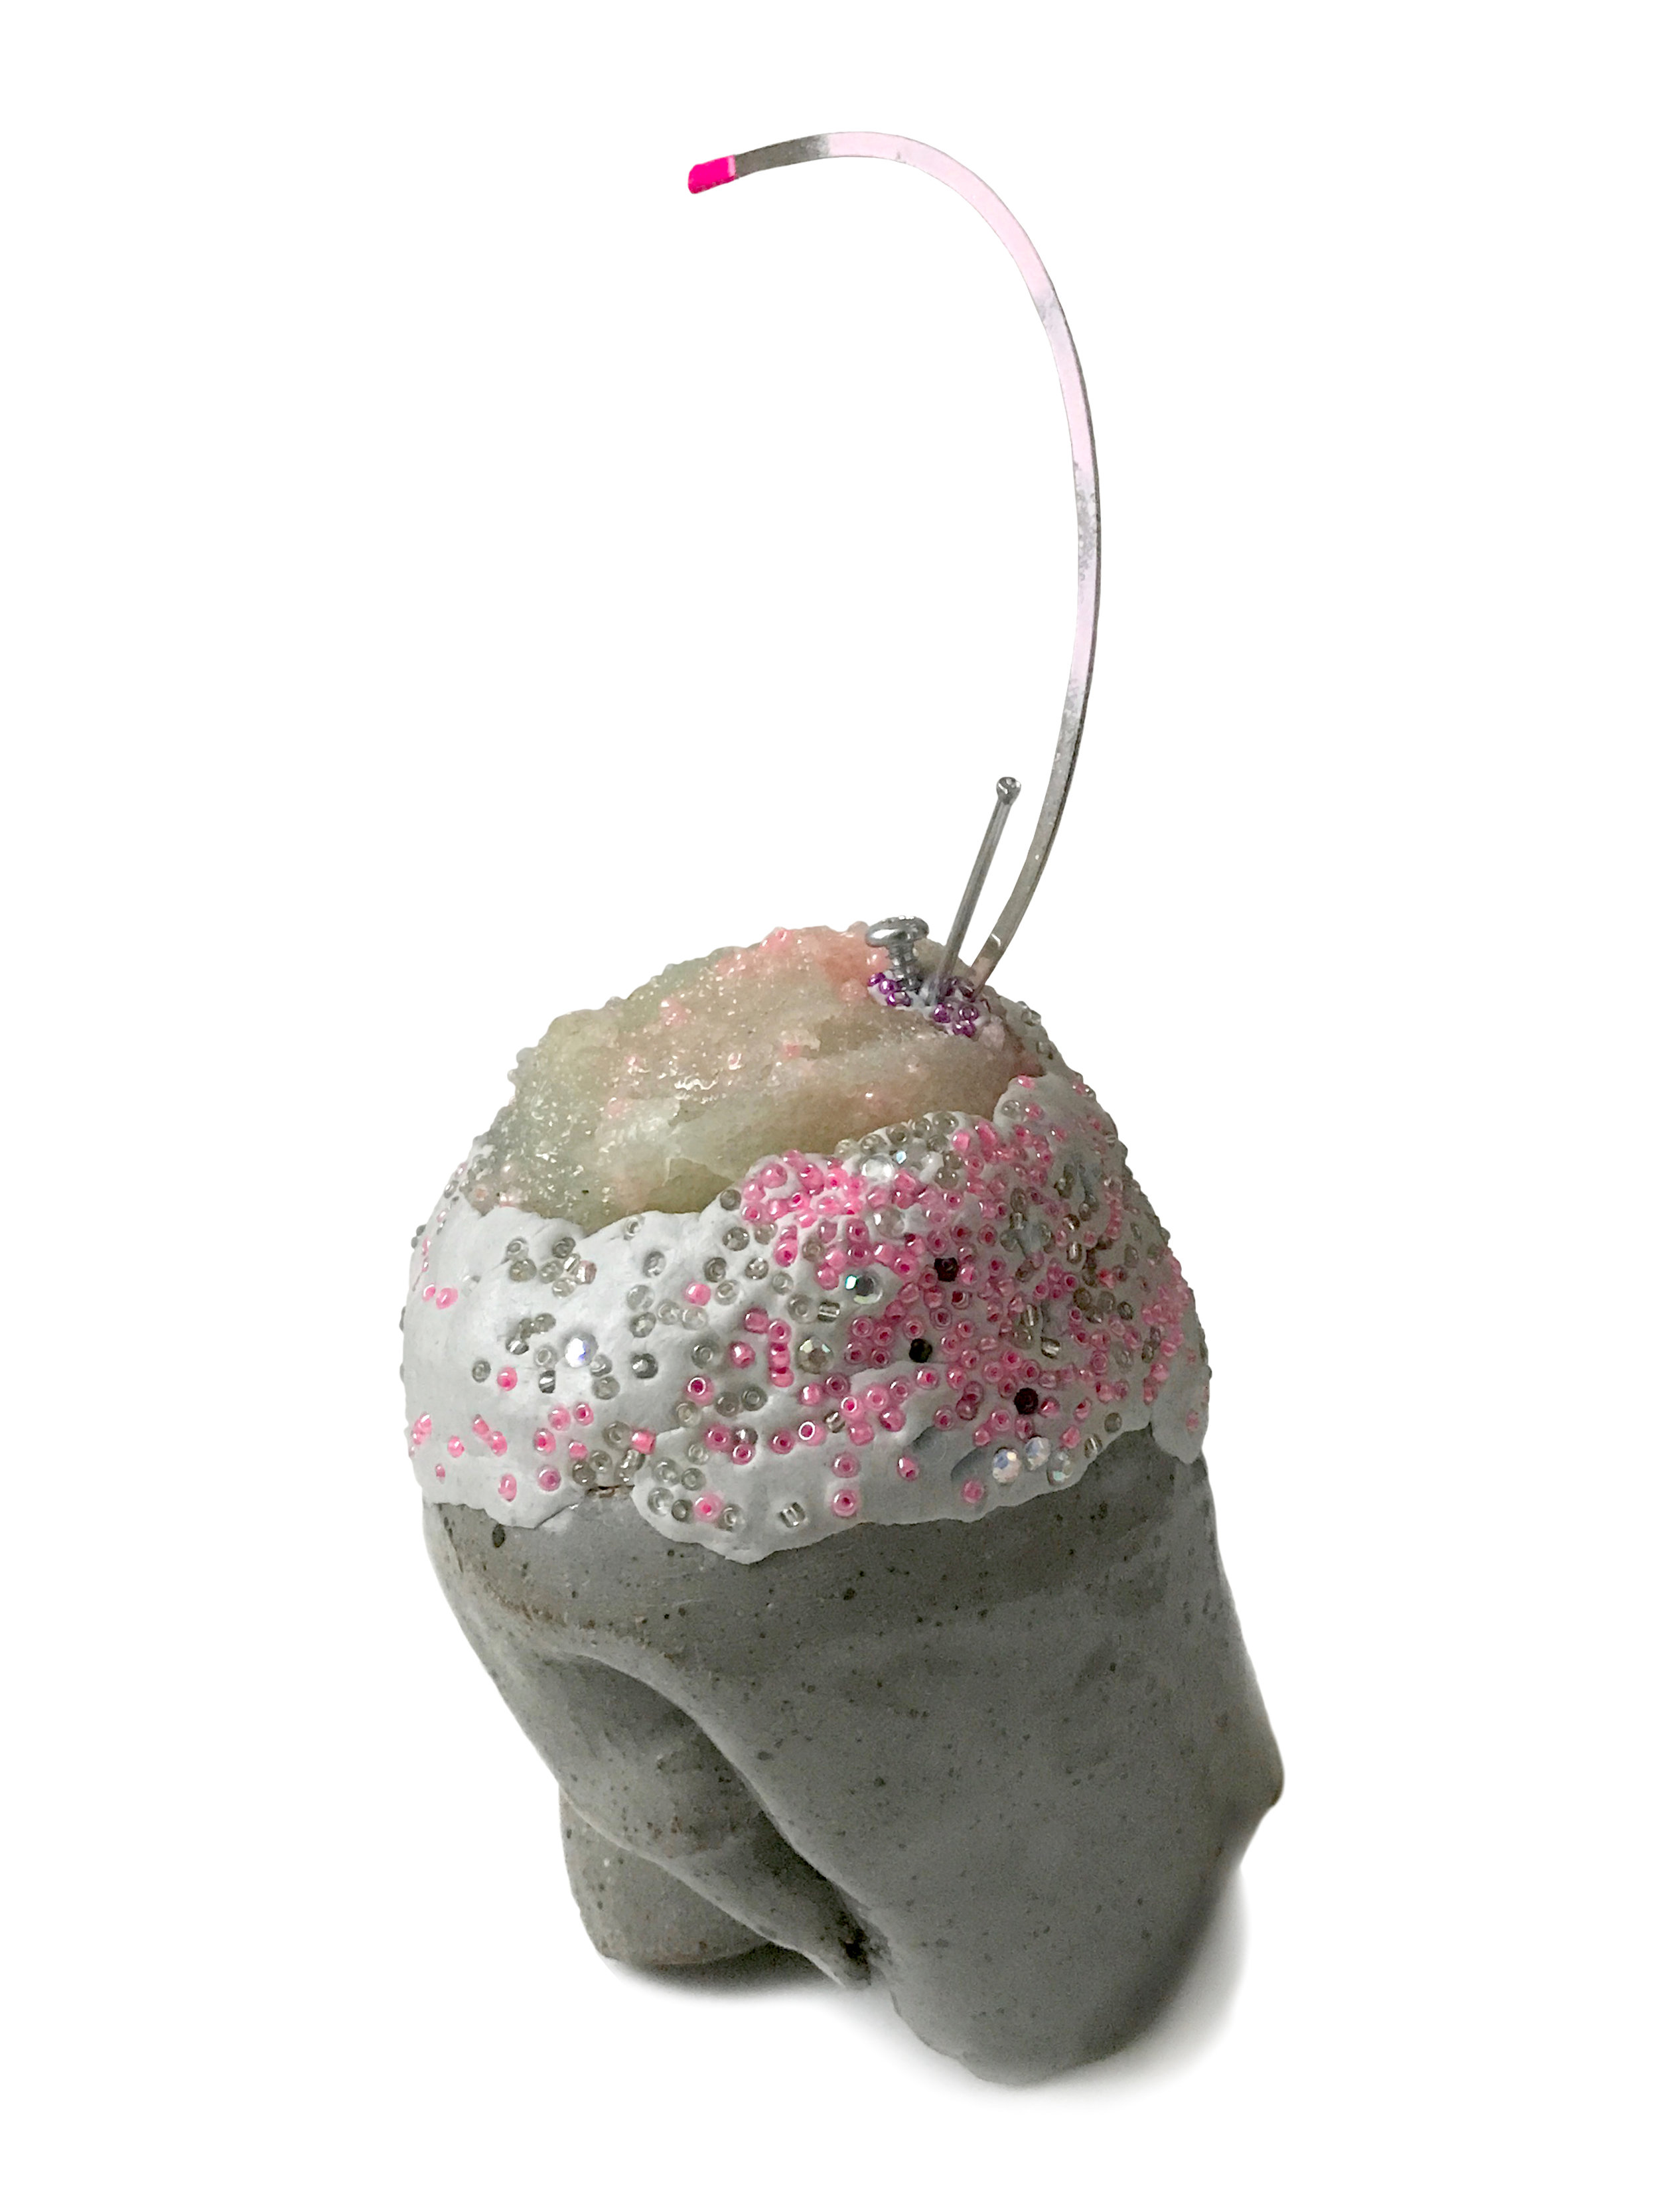    Just Bitten  , 2017 Glazed ceramic, sheetrock compound gel, epoxy clay, bead, nail, wire, screw, spray paint and enamel paint 6x3x3.5 inches 